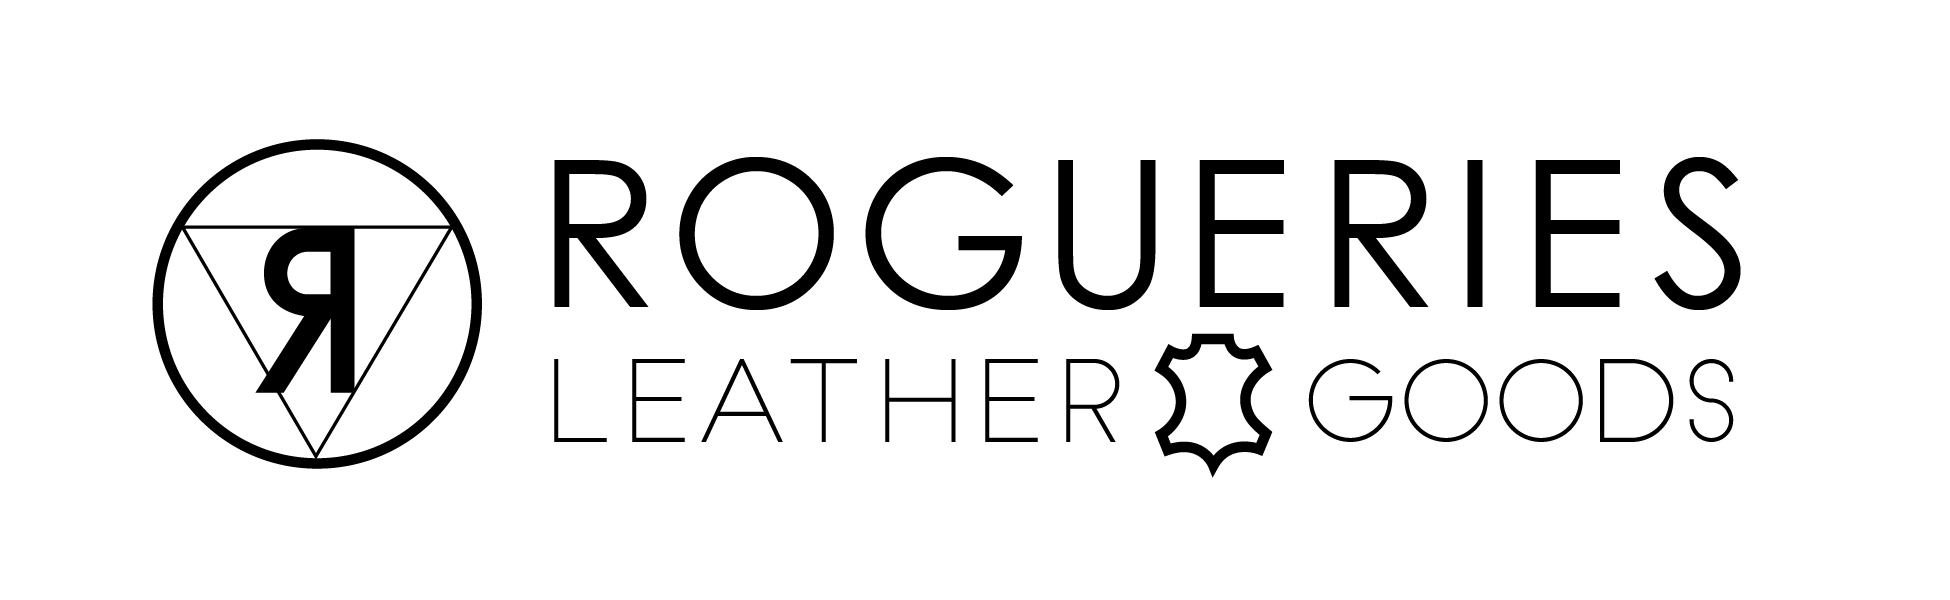 ROGUERIES Leather Goods